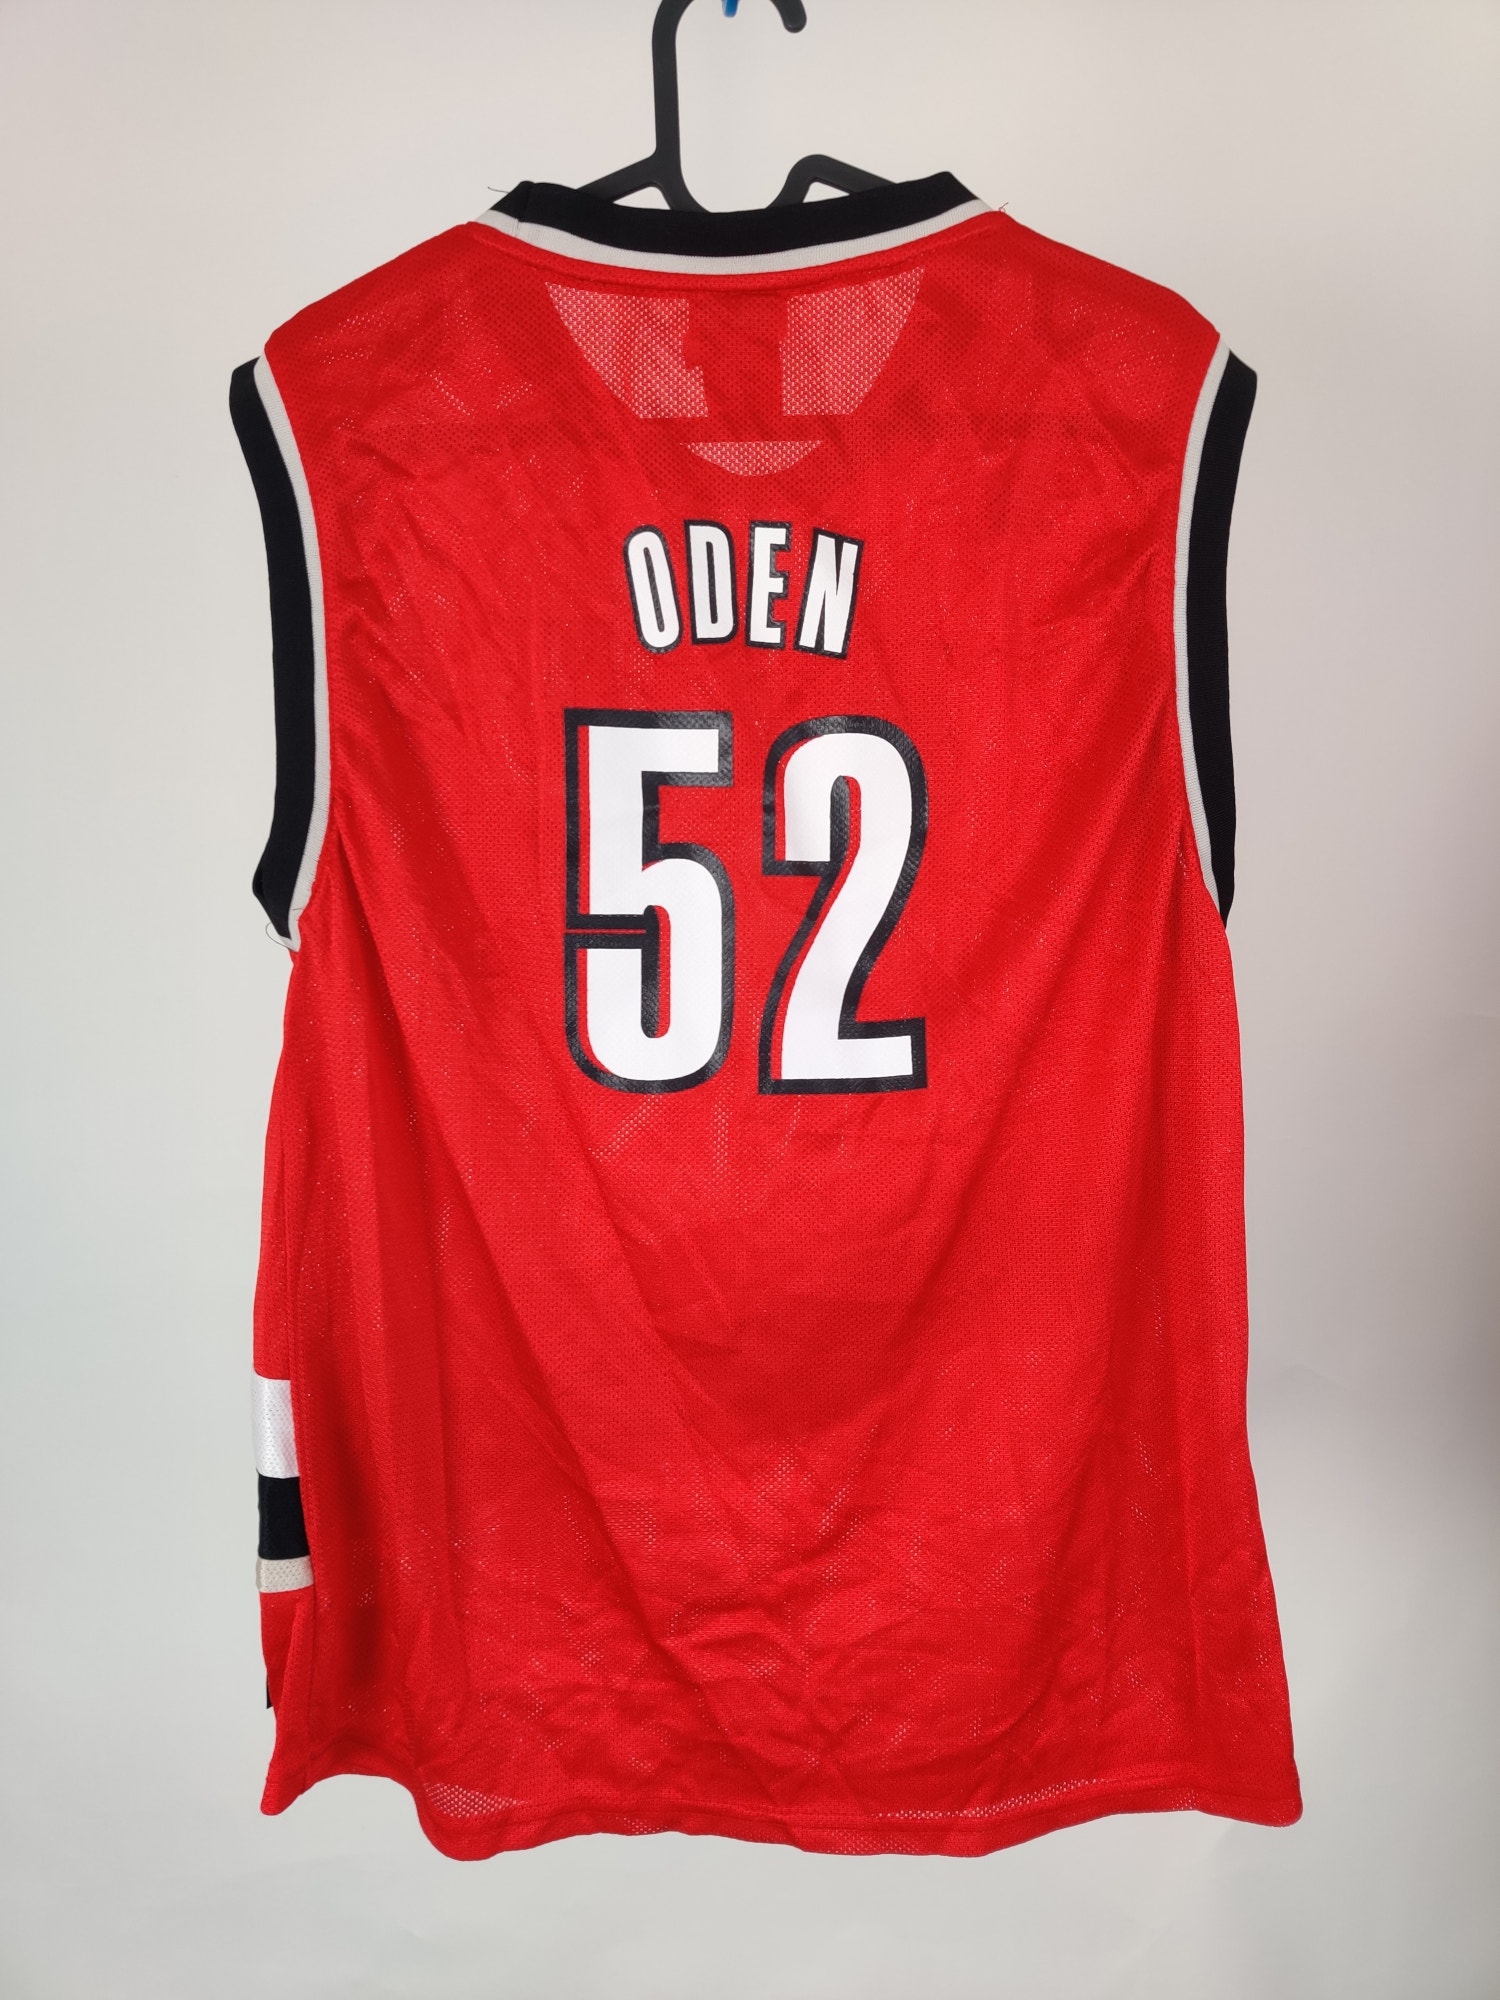 (V) Adidas NBA Portland Trail Blazers Youth jersey players Oden #52 sz XL  - Picture 5 of 11